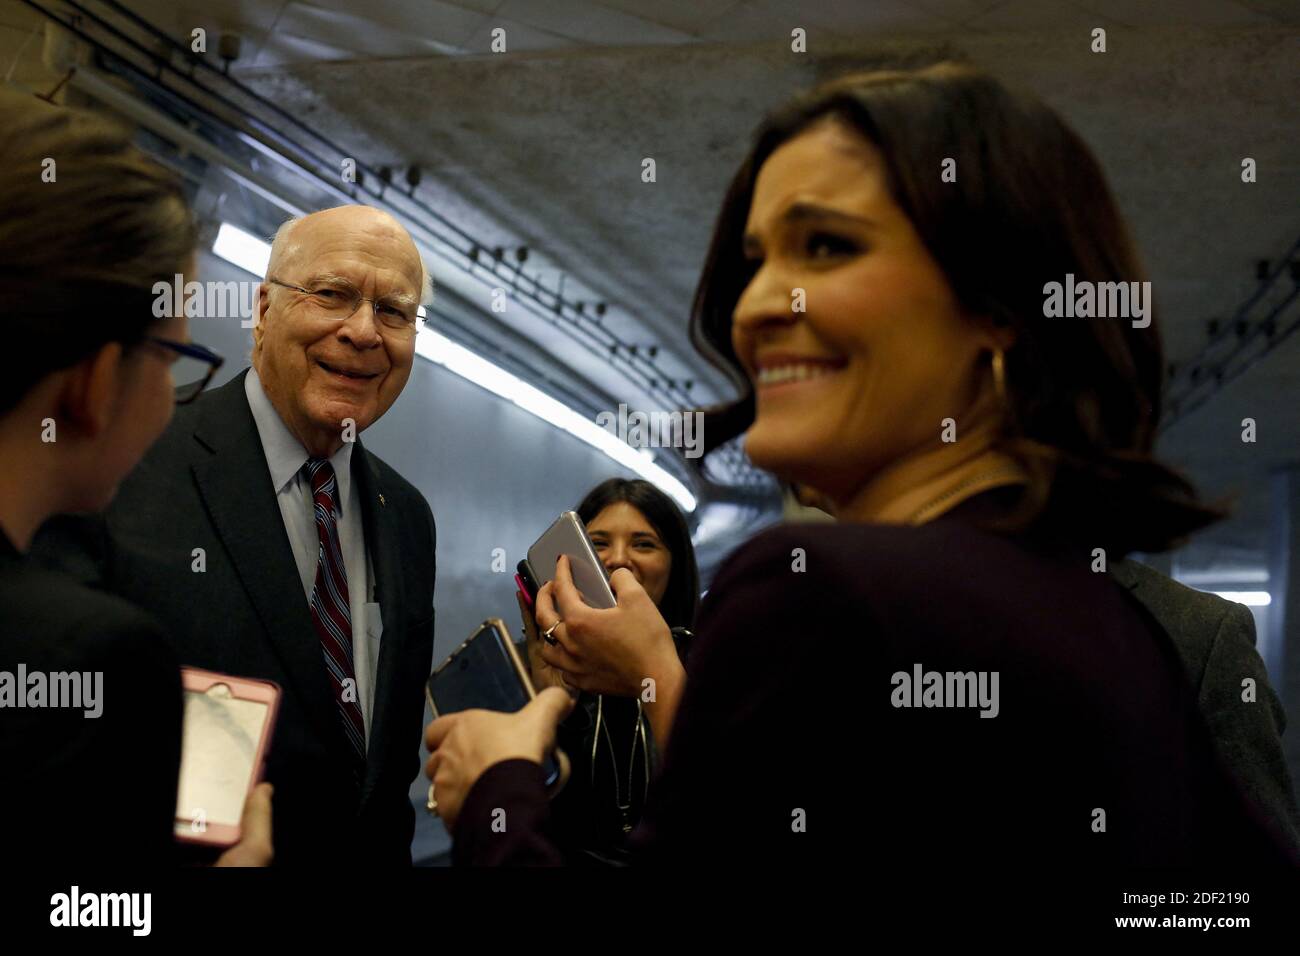 Senior U.S. Senator Patrick Leahy, a Democrat from Vermont, shares a laugh with reporters during a break from the impeachment trial at the U.S. Capitol in Washington, DC, USA on Thursday, January 30, 2020. Photo by Joshua Lott/CNP/ABACAPRESS.COM Stock Photo